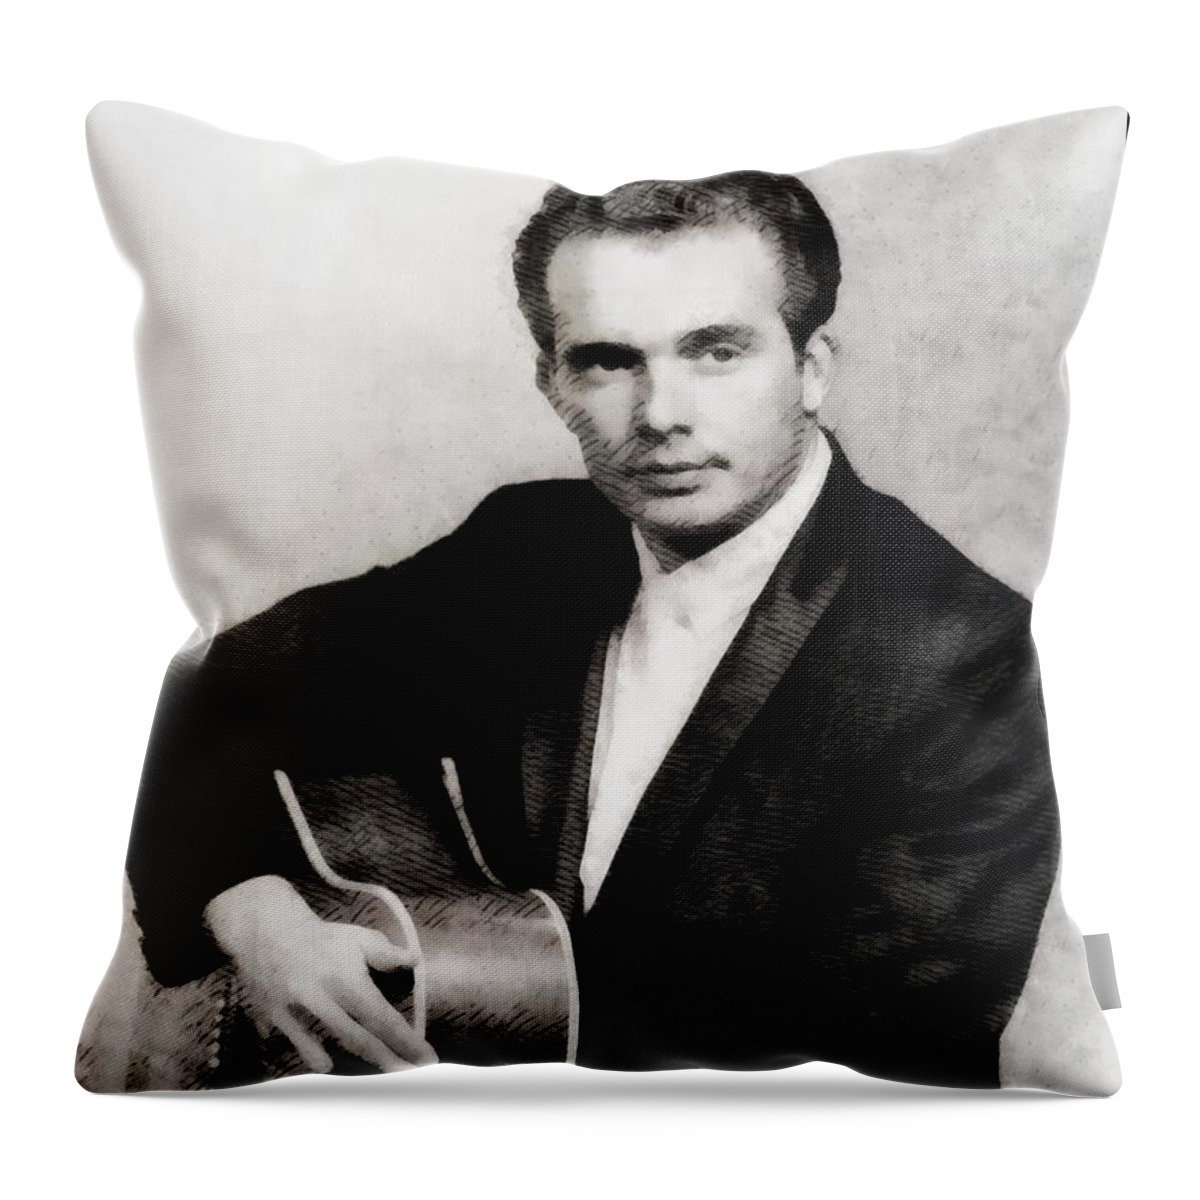 Hollywood Throw Pillow featuring the painting Merle Haggard, Music Legend by John Springfield by Esoterica Art Agency